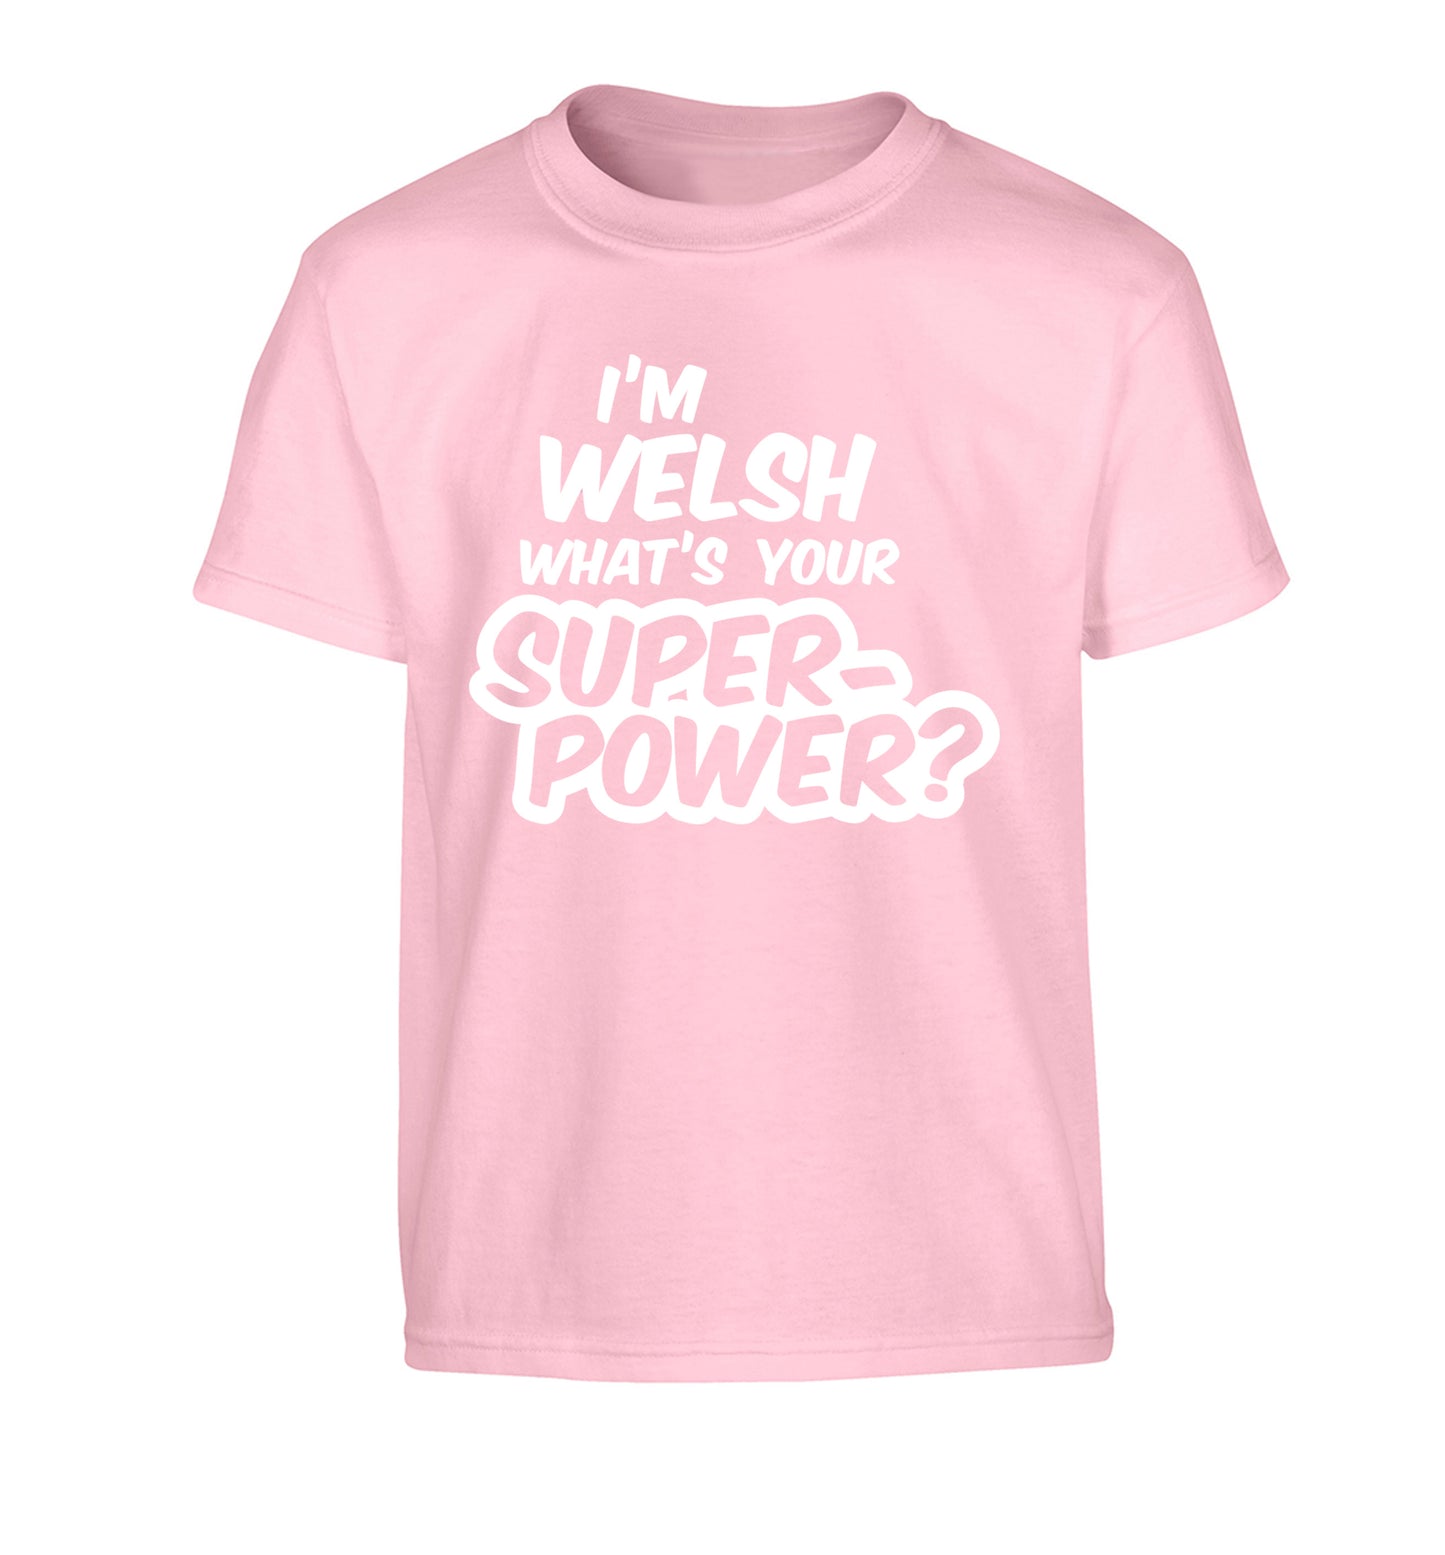 I'm Welsh what's your superpower? Children's light pink Tshirt 12-13 Years